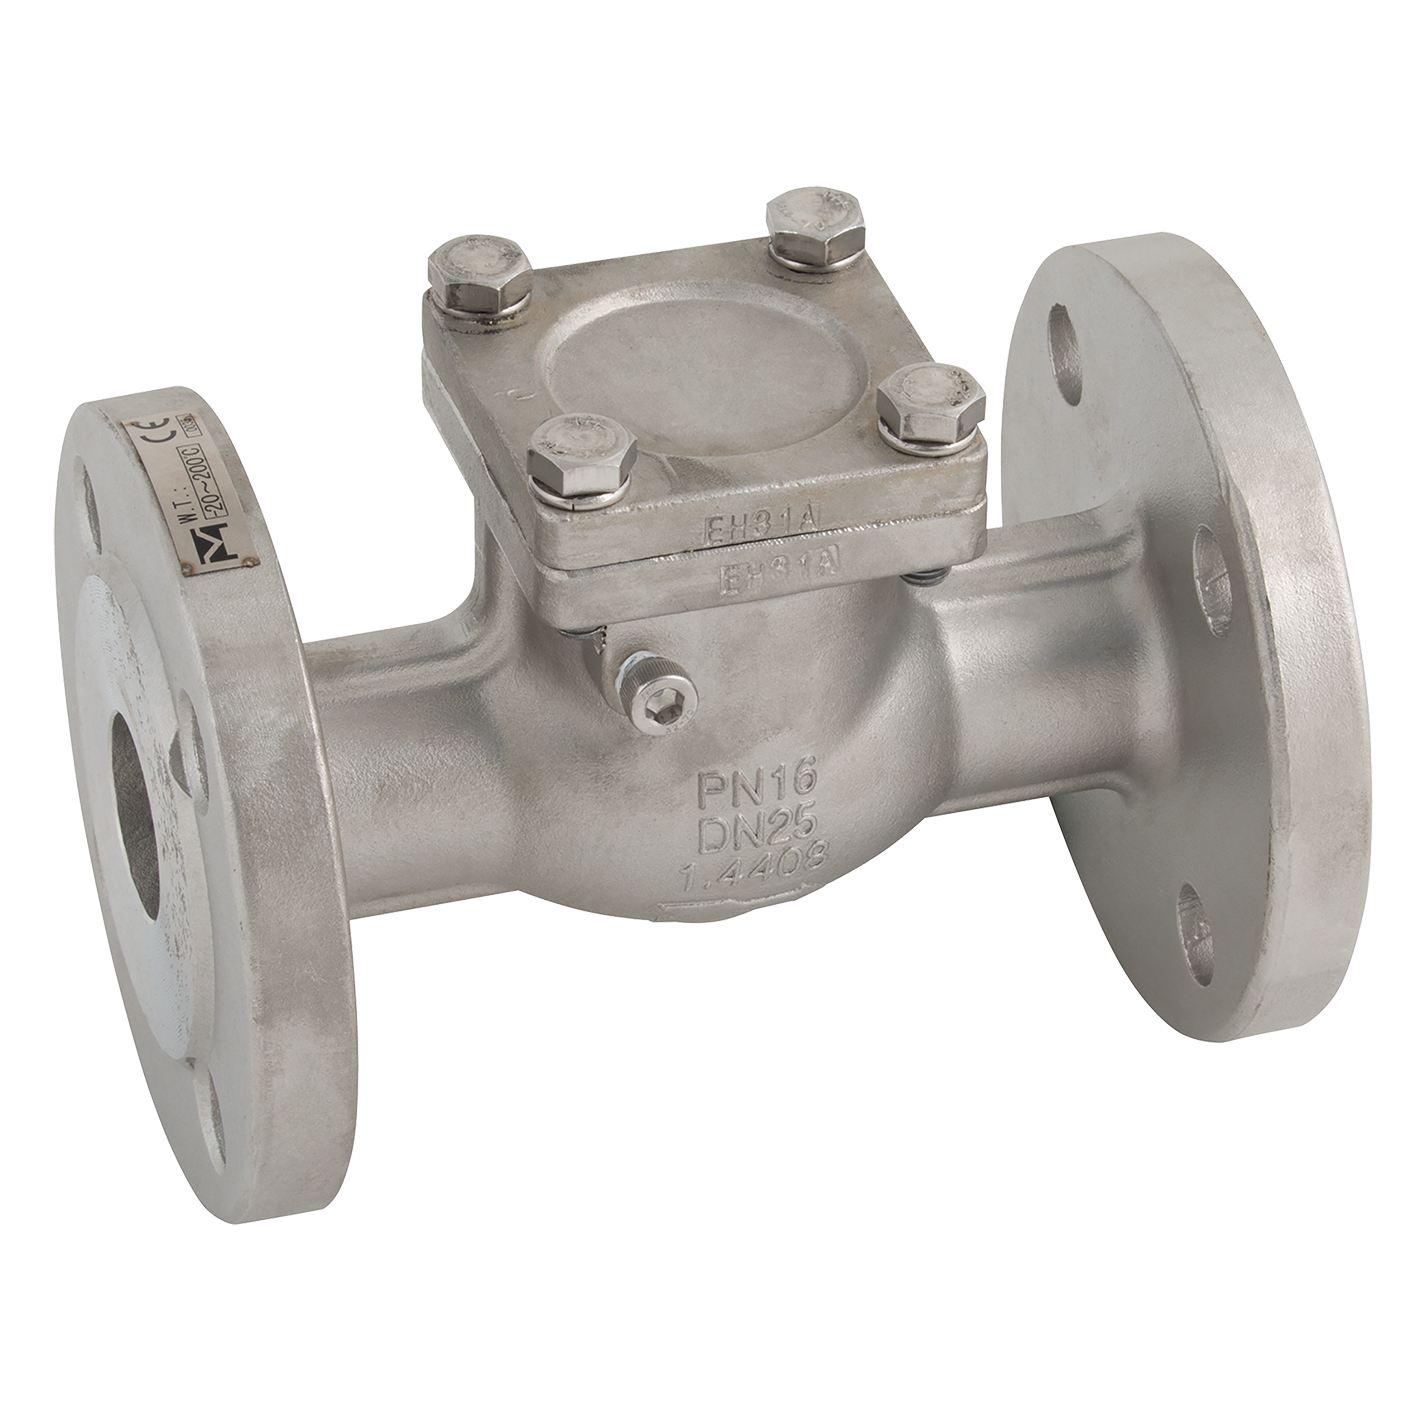 2" PN16 FLANGED S/S SWING CHECK Valve